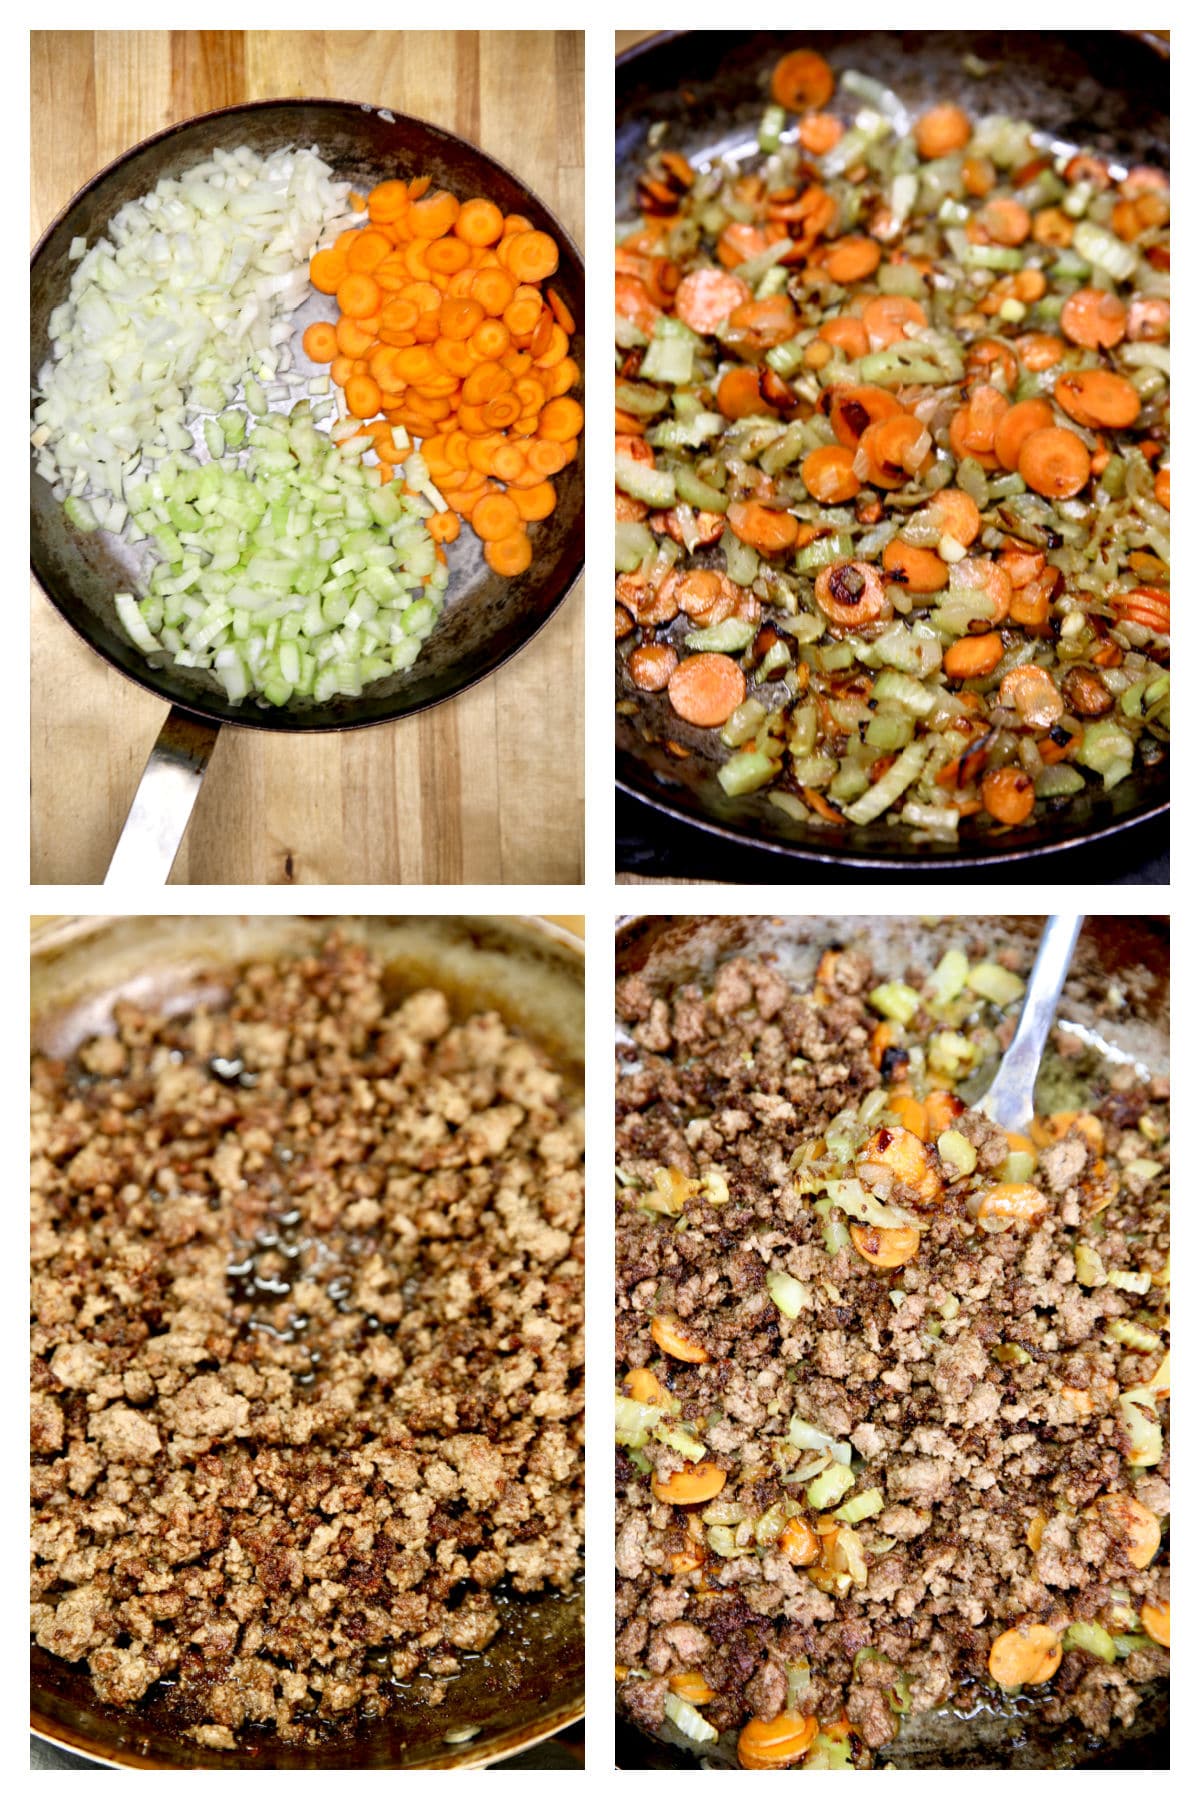 Collage cooking vegetables in a skillet/ ground beef/ mixed together.